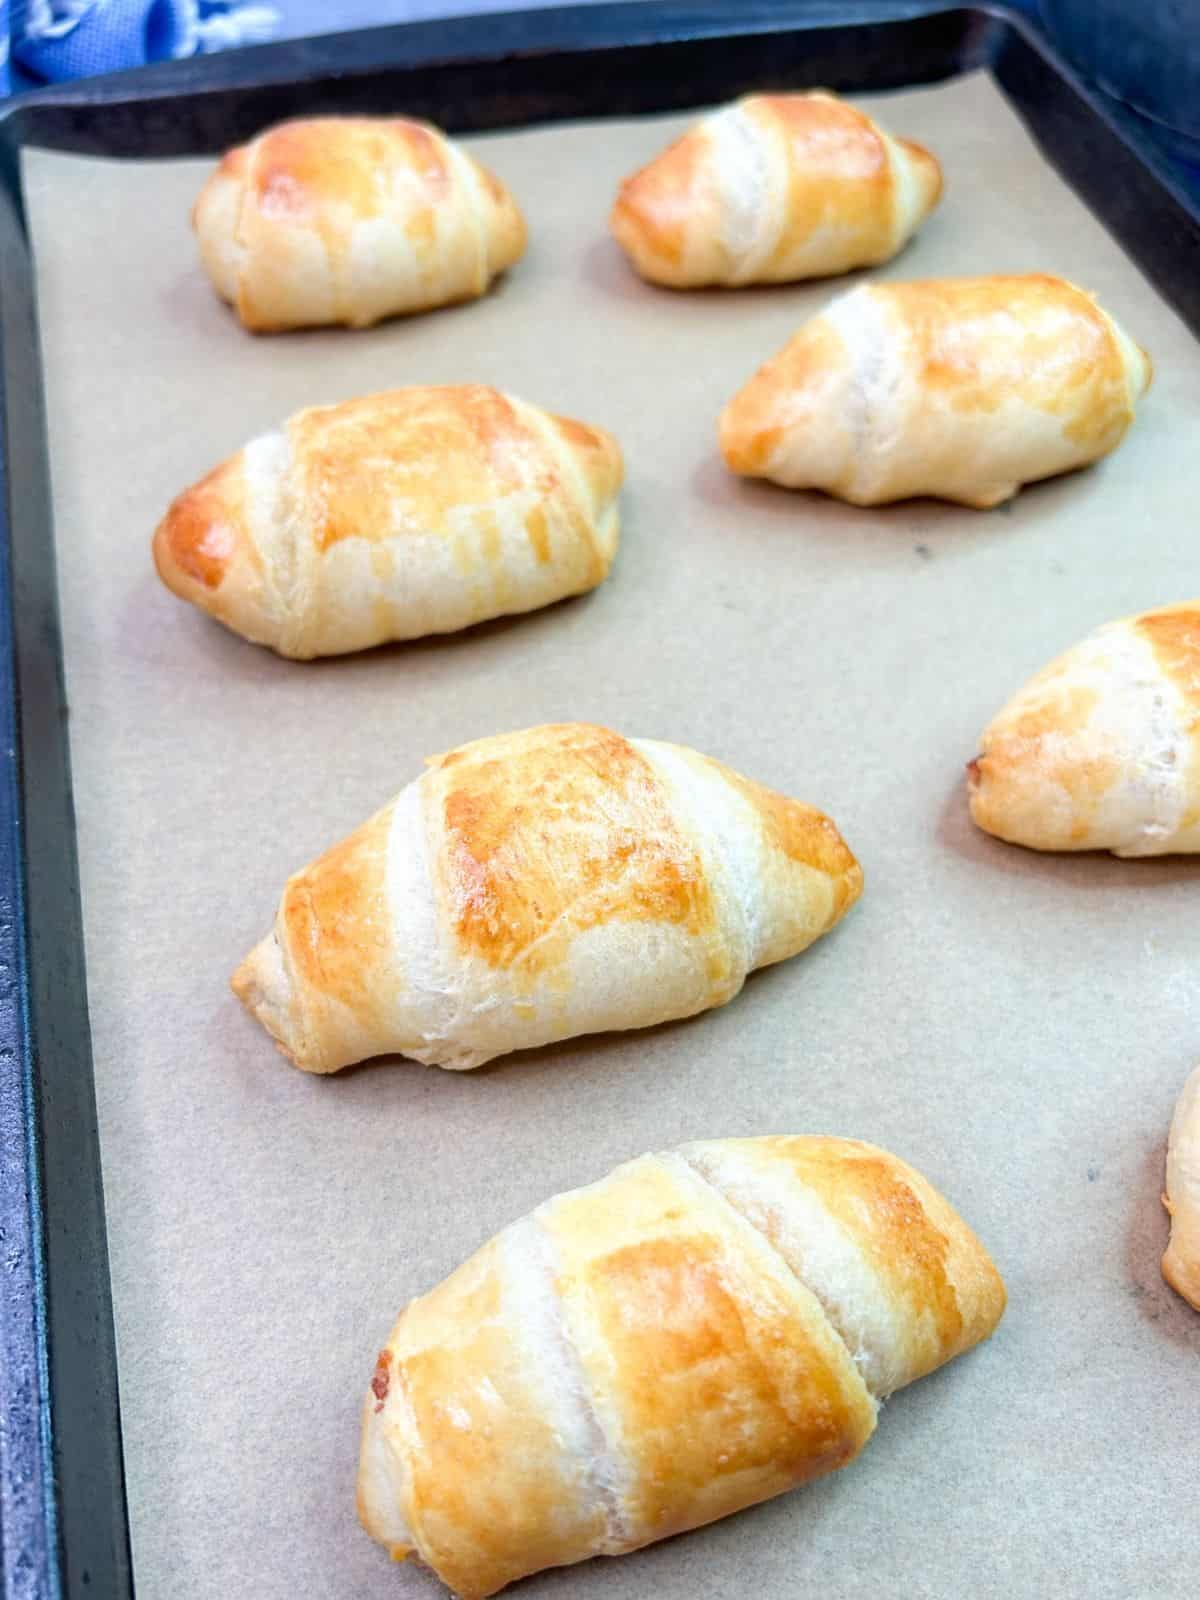 baked crescent rolls on parchment paper lined baking sheet.